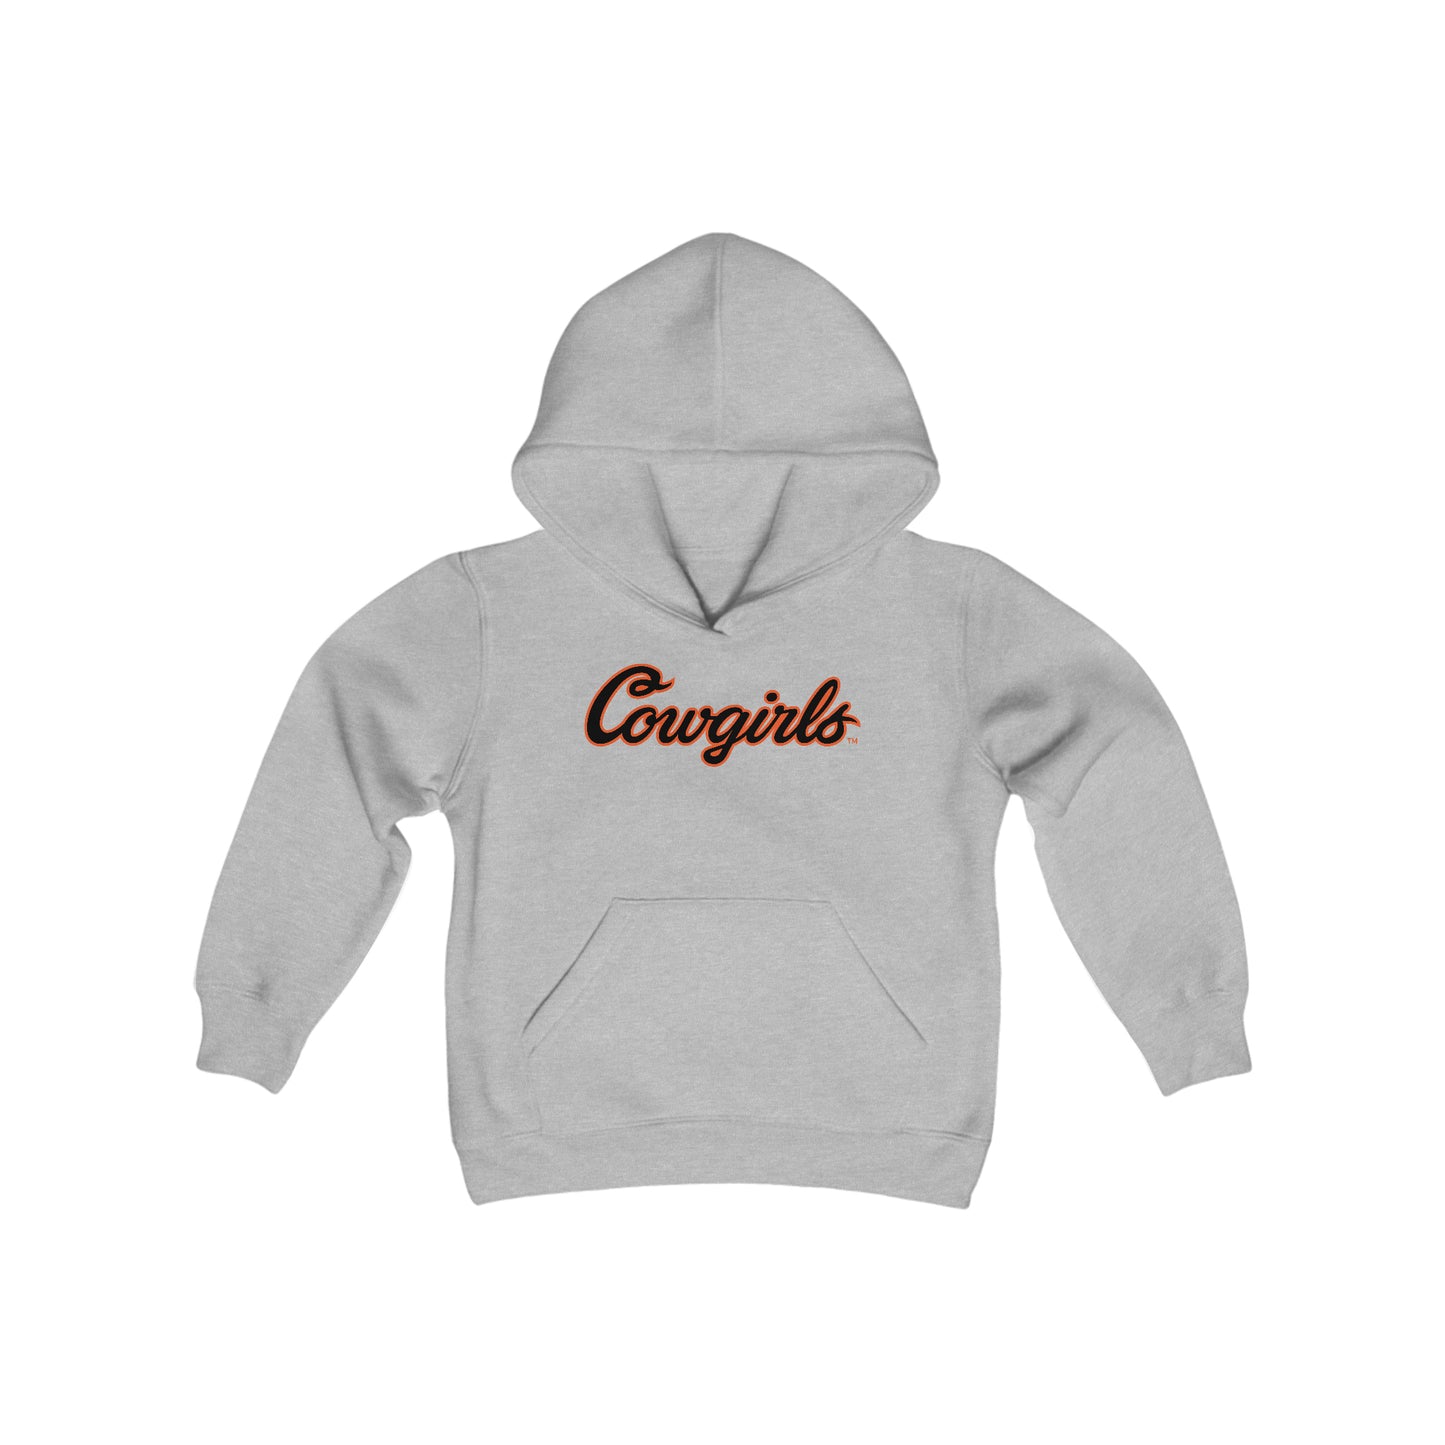 Chandler Prater #5 Cursive Cowgirls Youth Hoodie